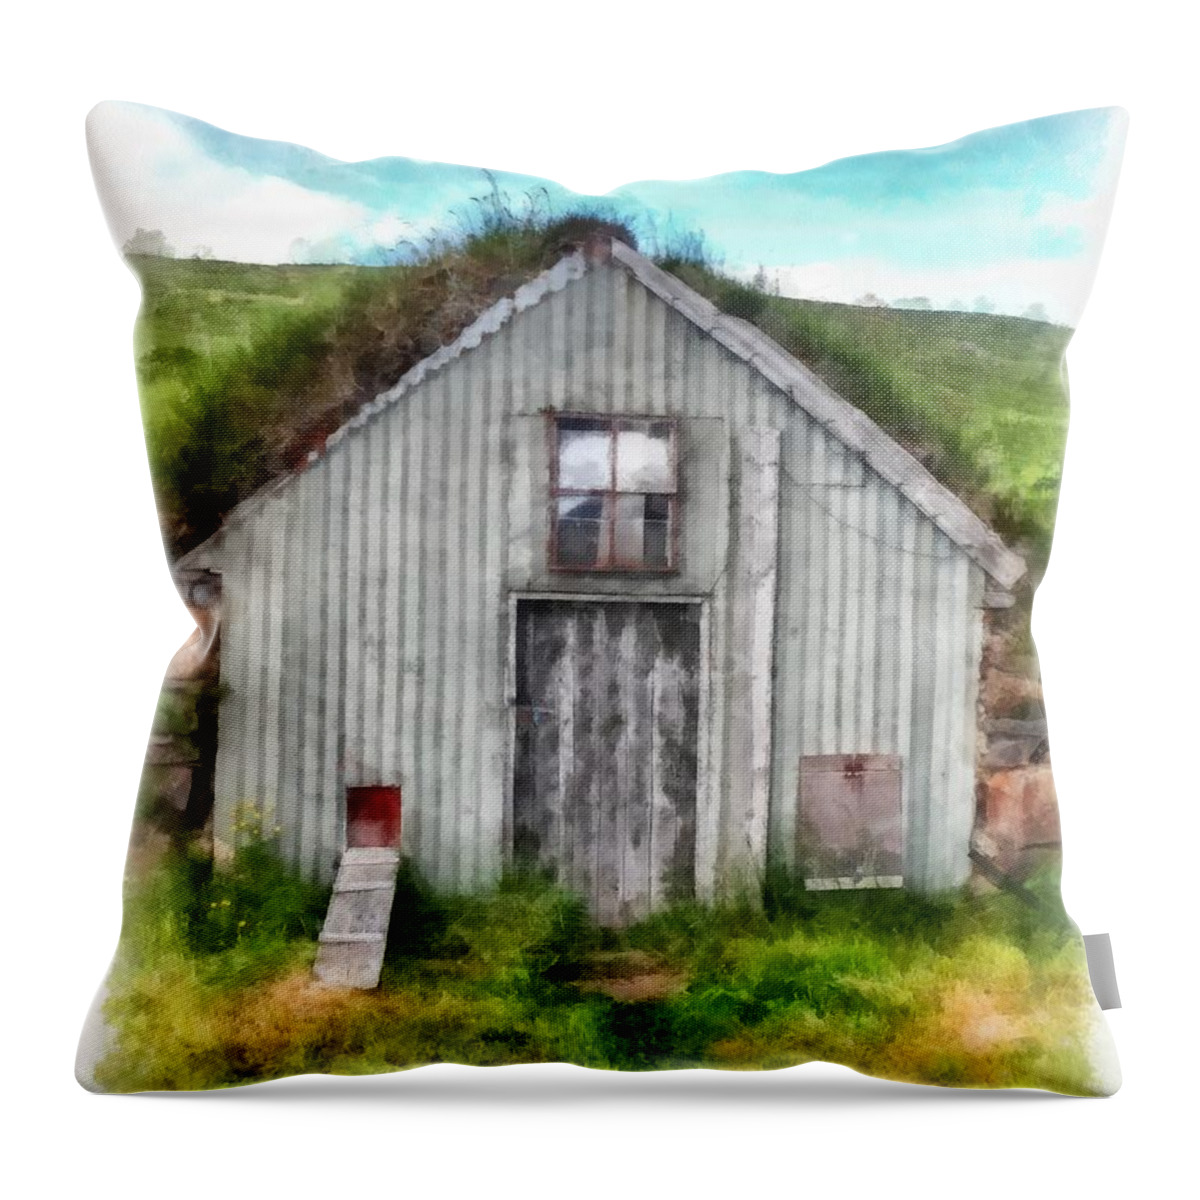 Iceland Throw Pillow featuring the painting The Old Chicken Coop Iceland Turf Barn by Edward Fielding